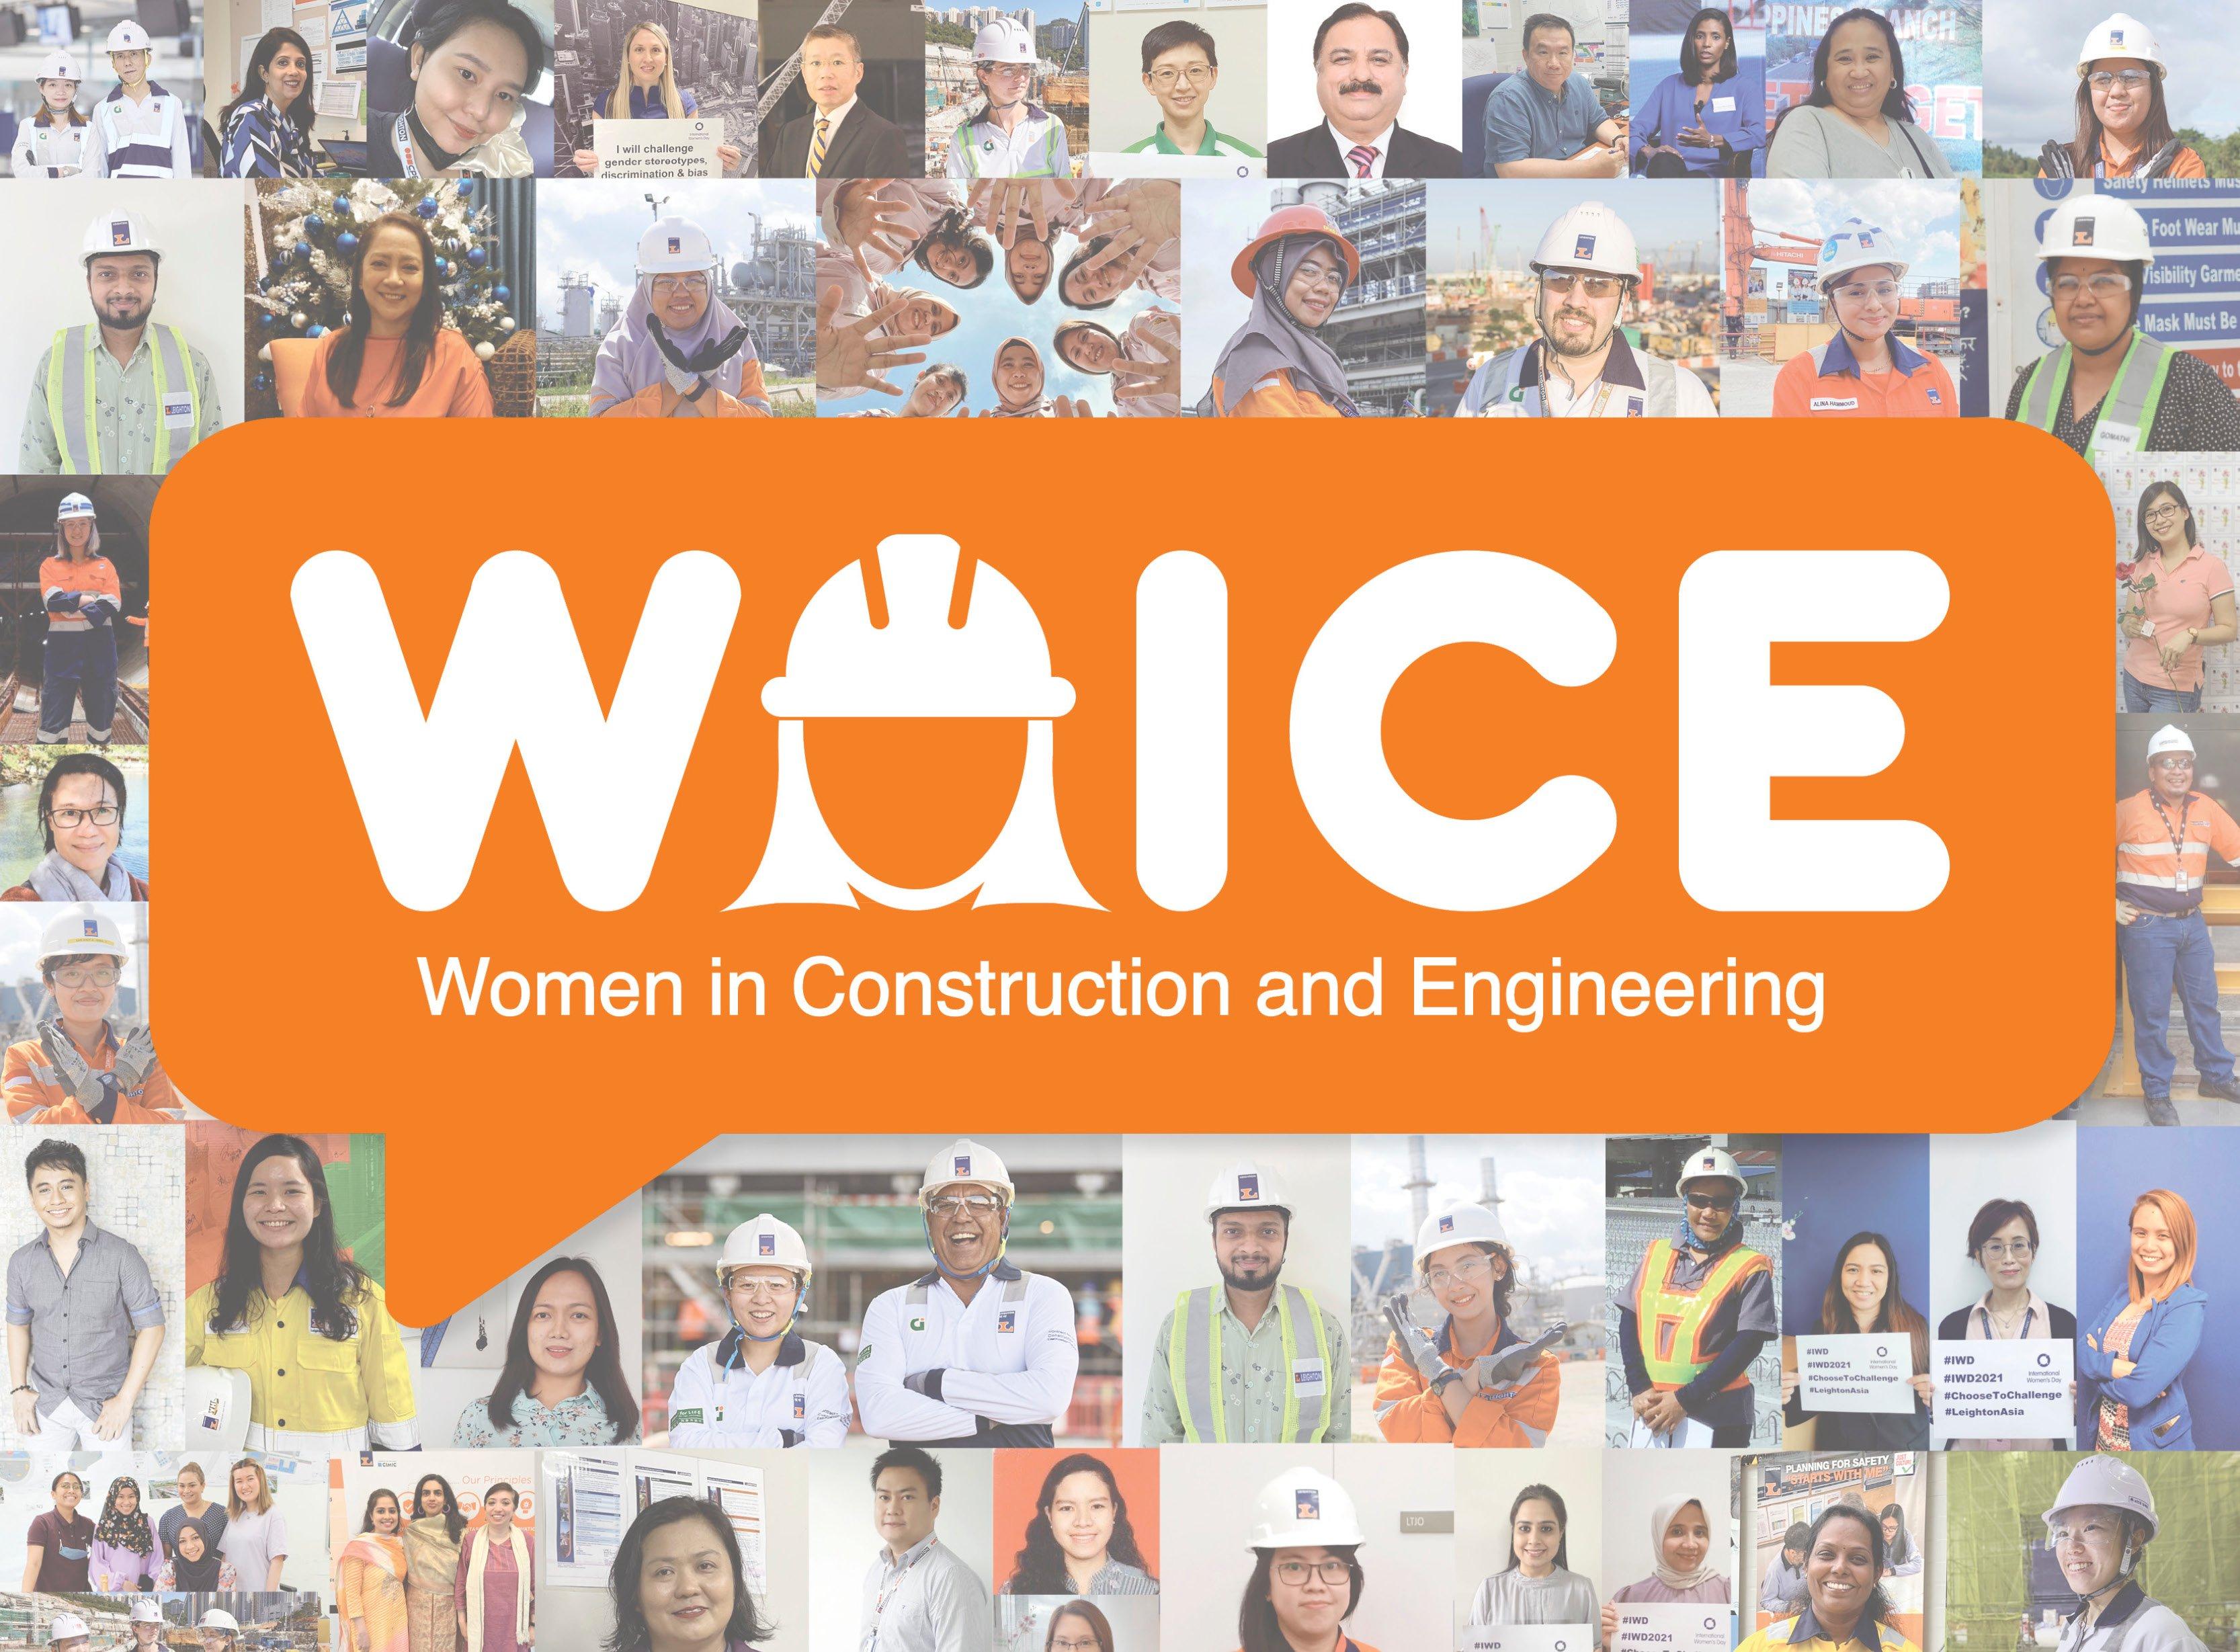 Women in Construction and Engineering